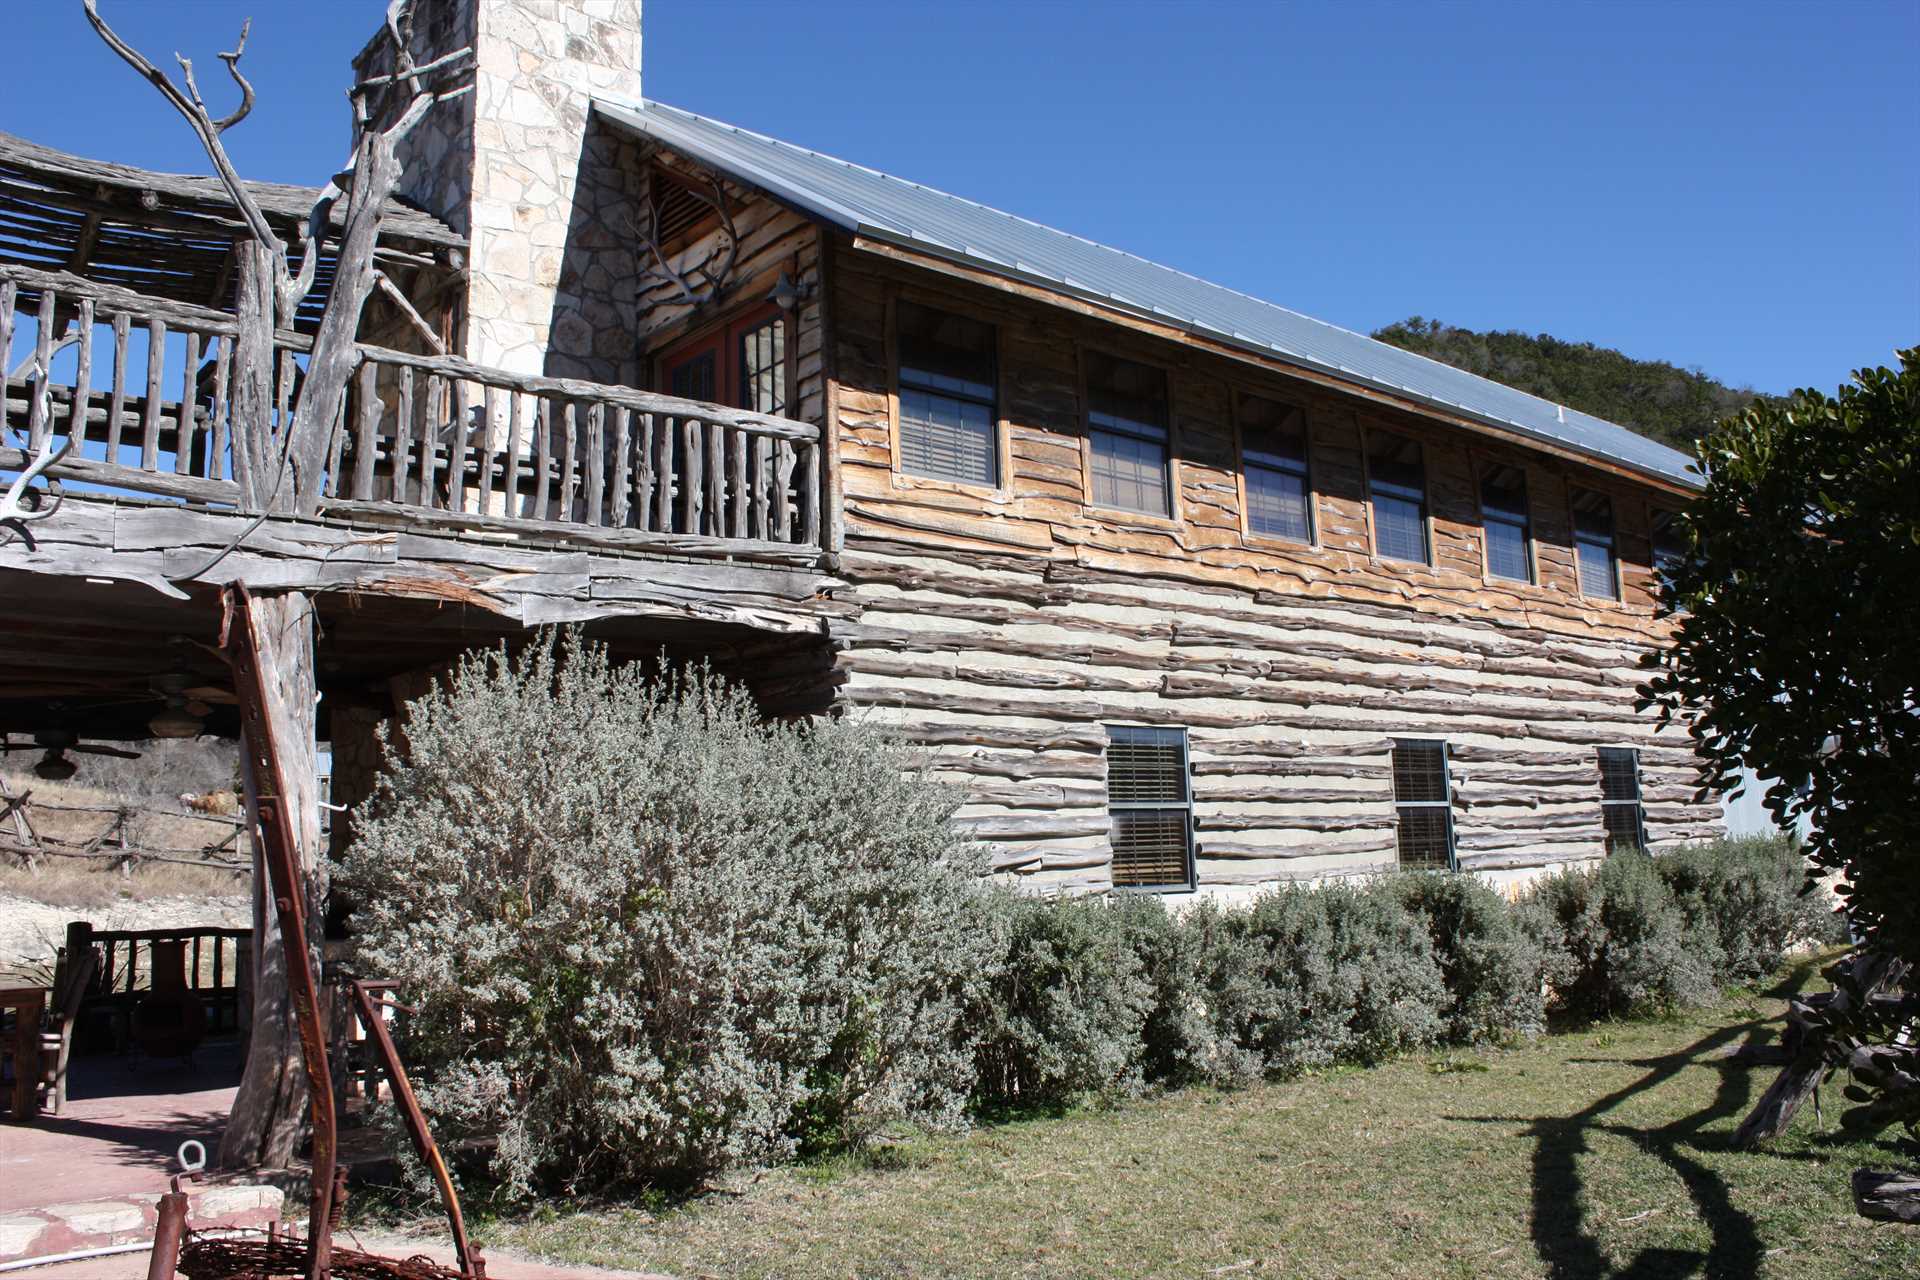                                                 Imagine your crew having this massive, beautiful Hill Country lodge all to yourselves!